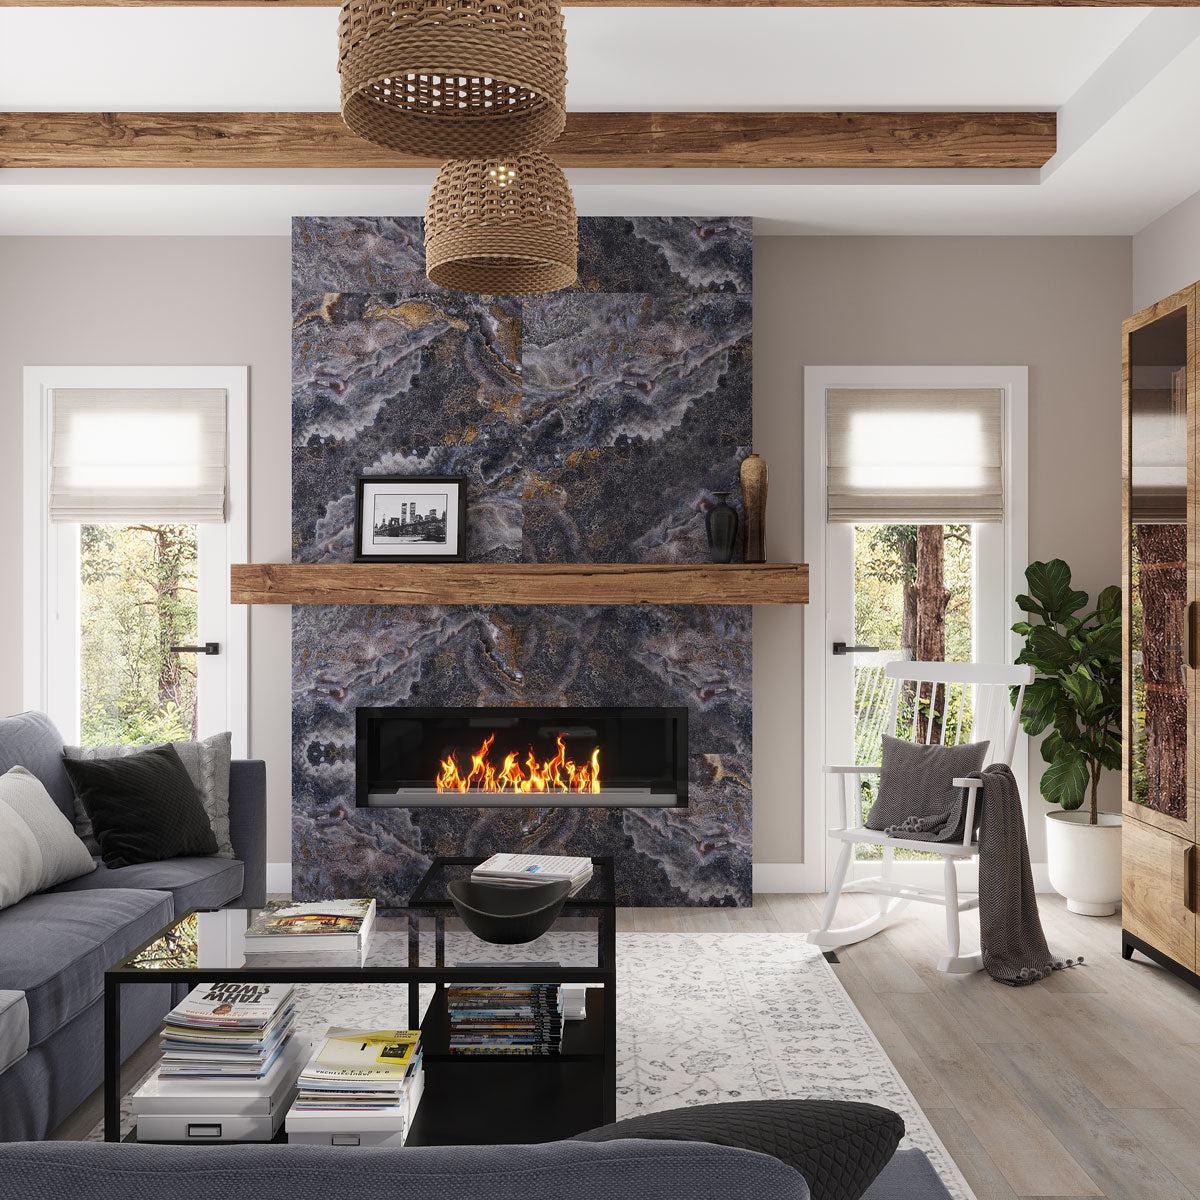 Stone slab-look fireplace design for a modern interior